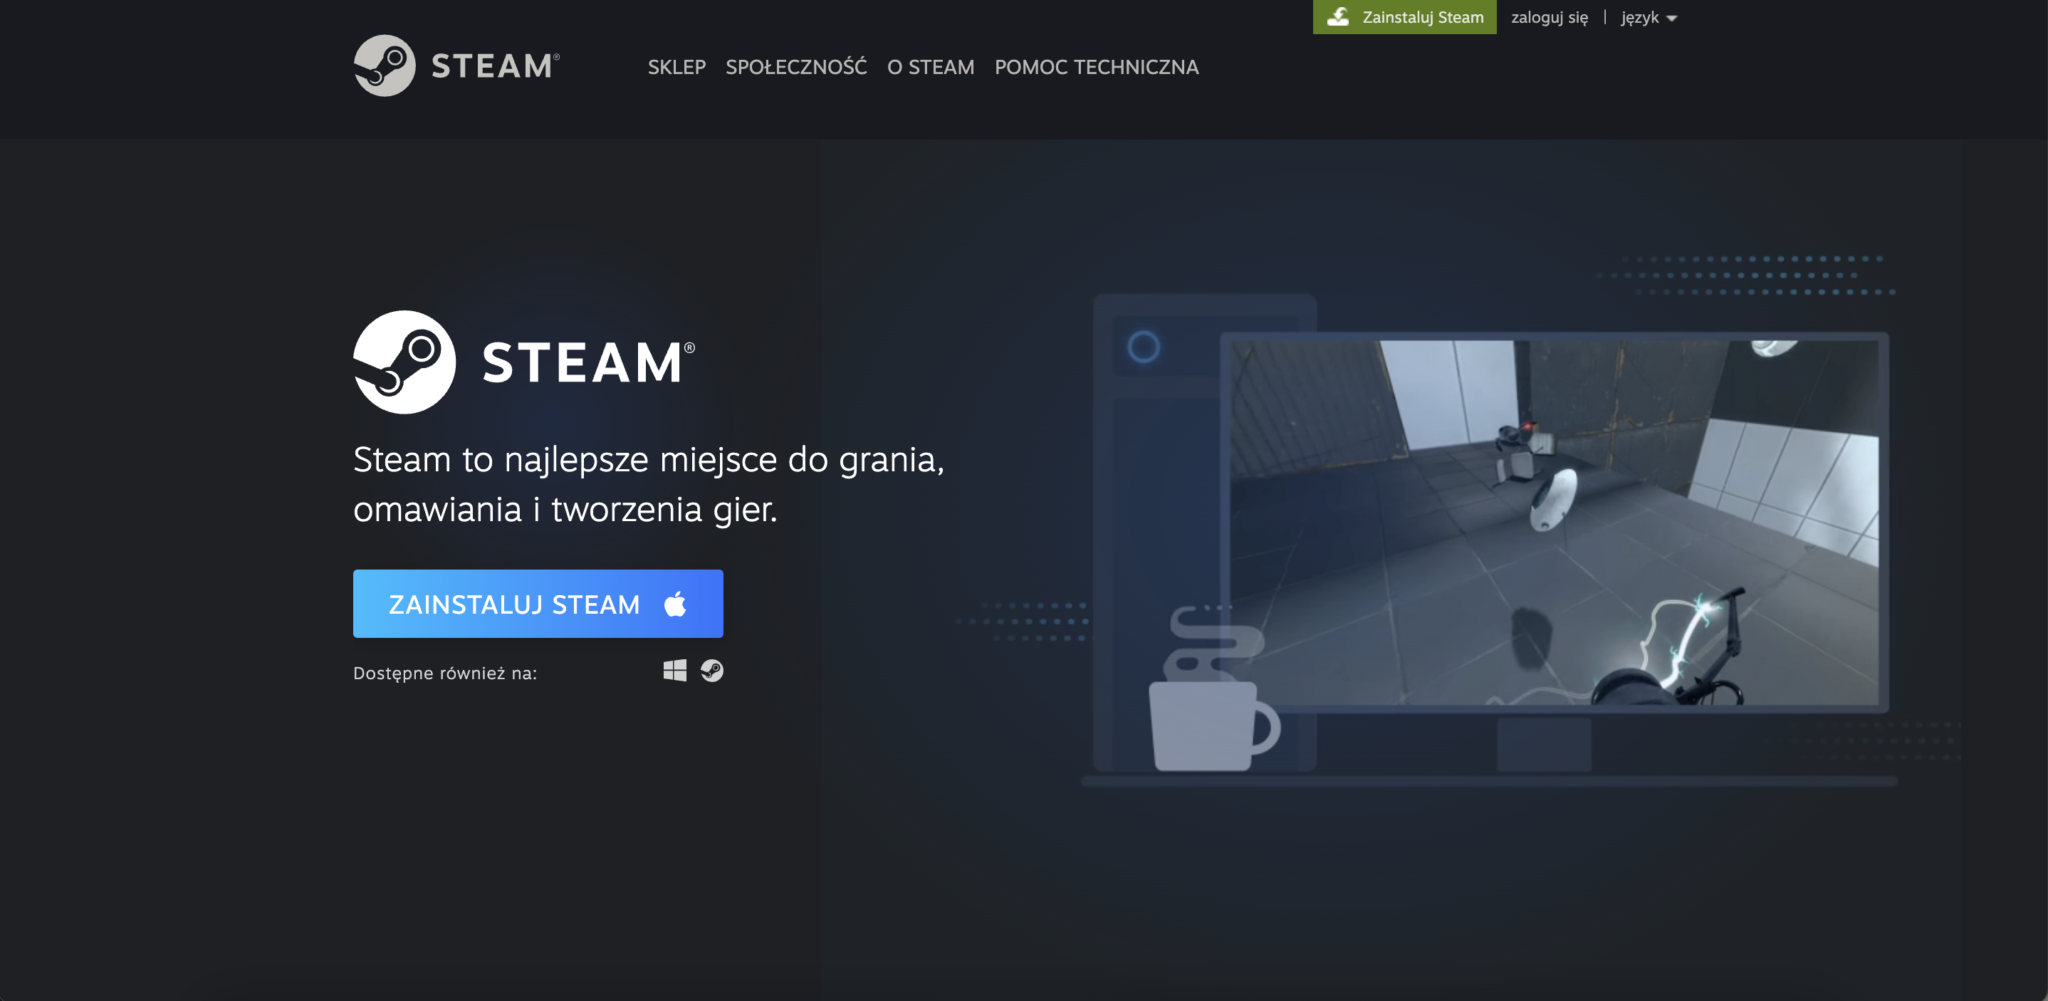 Data sent by steam is empty фото 5